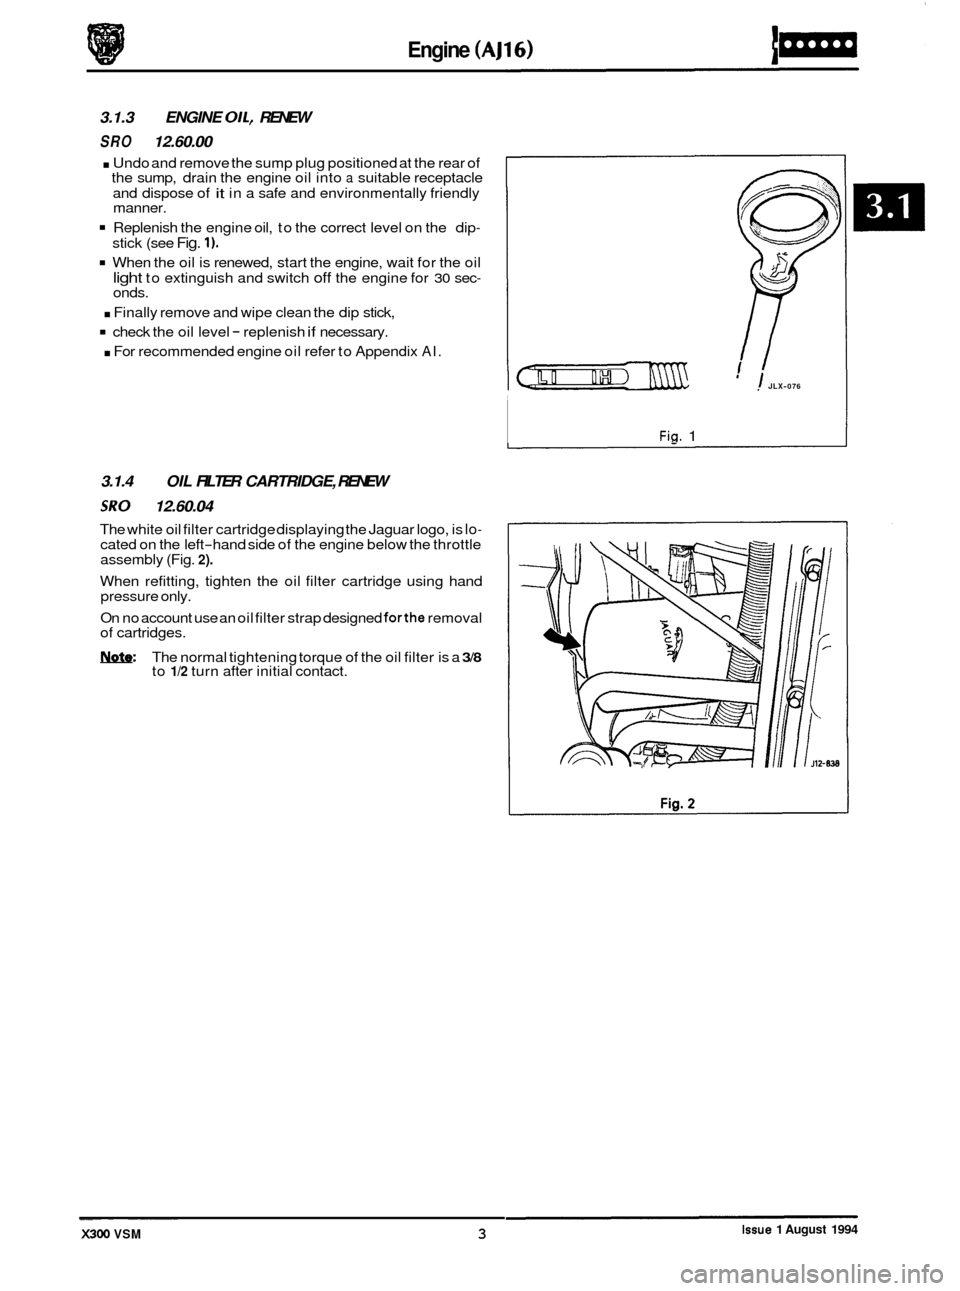 JAGUAR XJ6 1994 2.G User Guide Engine 
3.1.3 ENGINE OIL, RENEW 
SRO 12.60.00 
. Undo and  remove the sump  plug positioned  at the  rear  of 
the  sump,  drain the  engine oil into a suitable  receptacle 
and  dispose  of 
it in a 